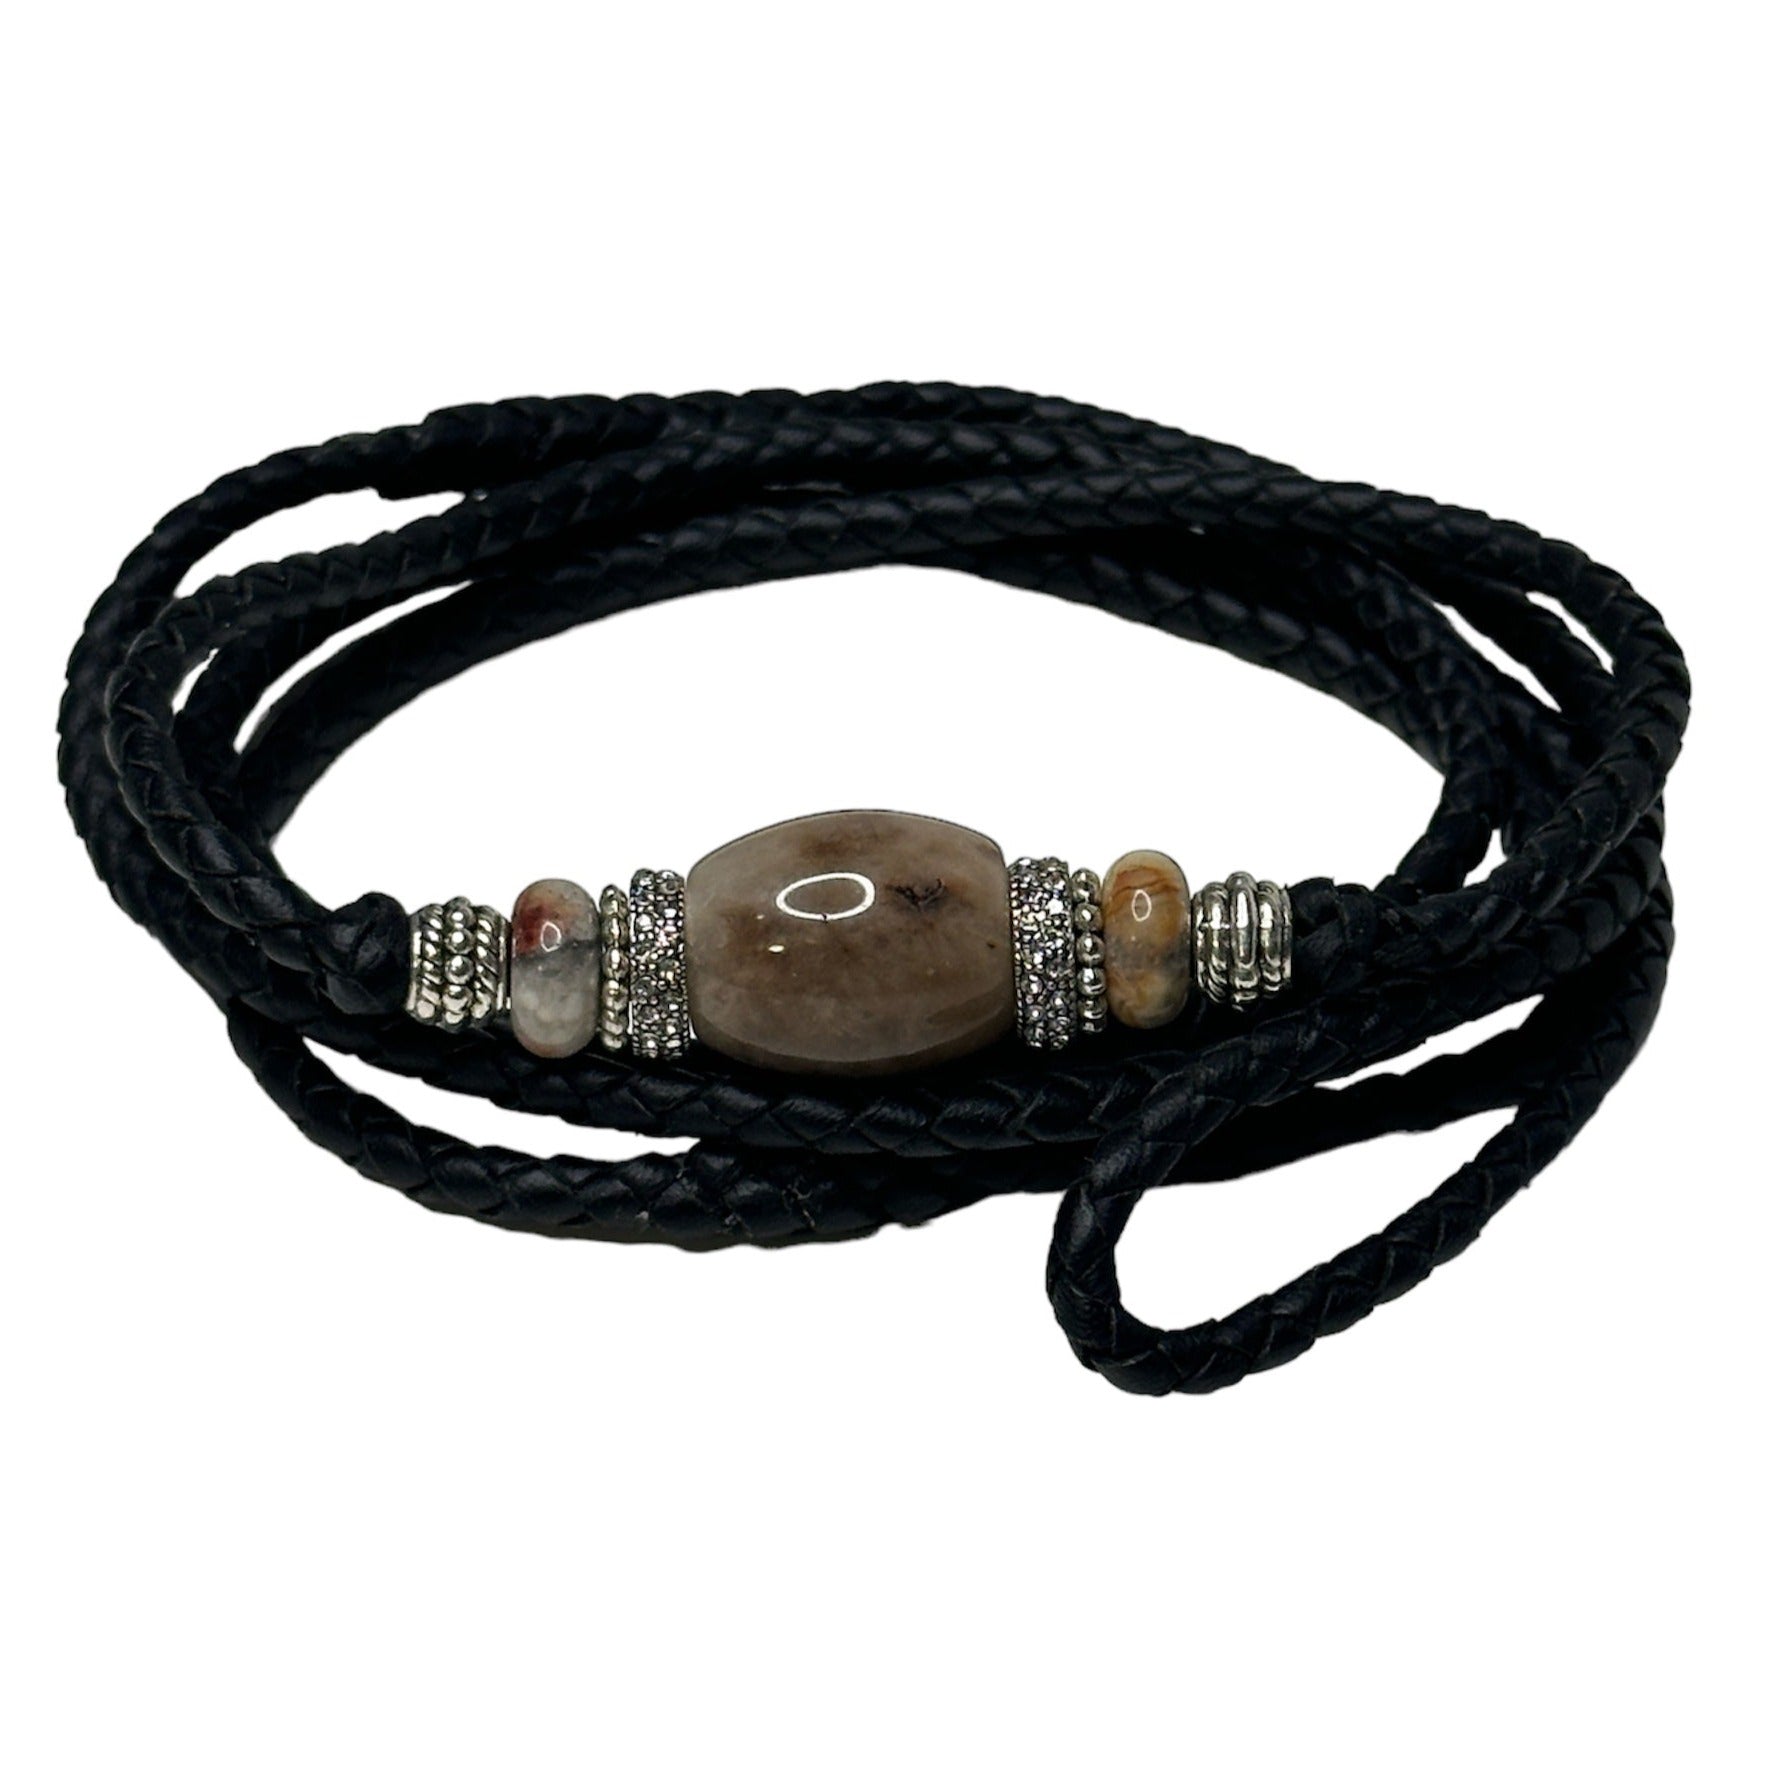 Exquisite Kangaroo Leather Show Lead with Moonstone - 40" Black